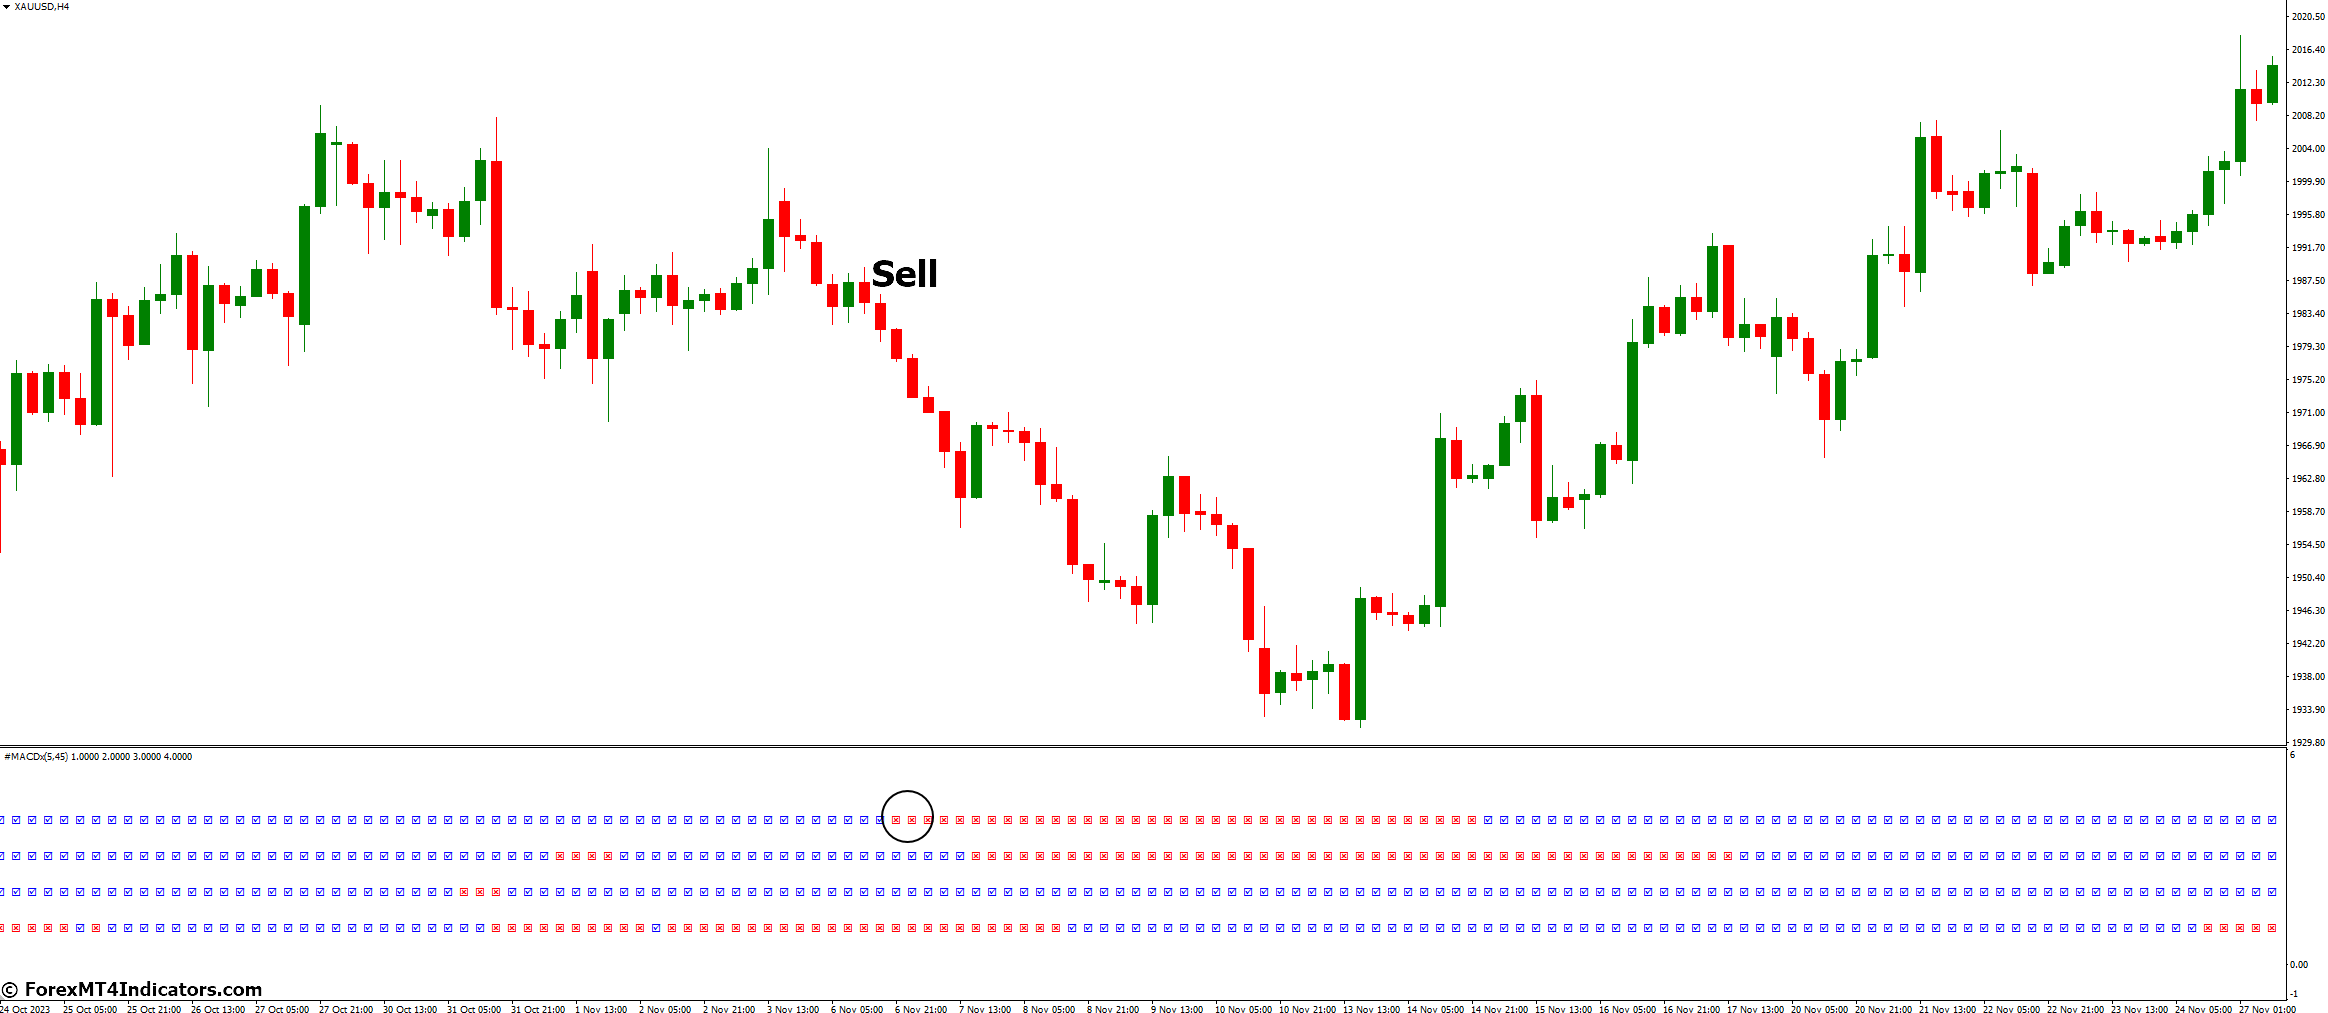 How to Trade with MTF Macd X Indicator - Sell Entry